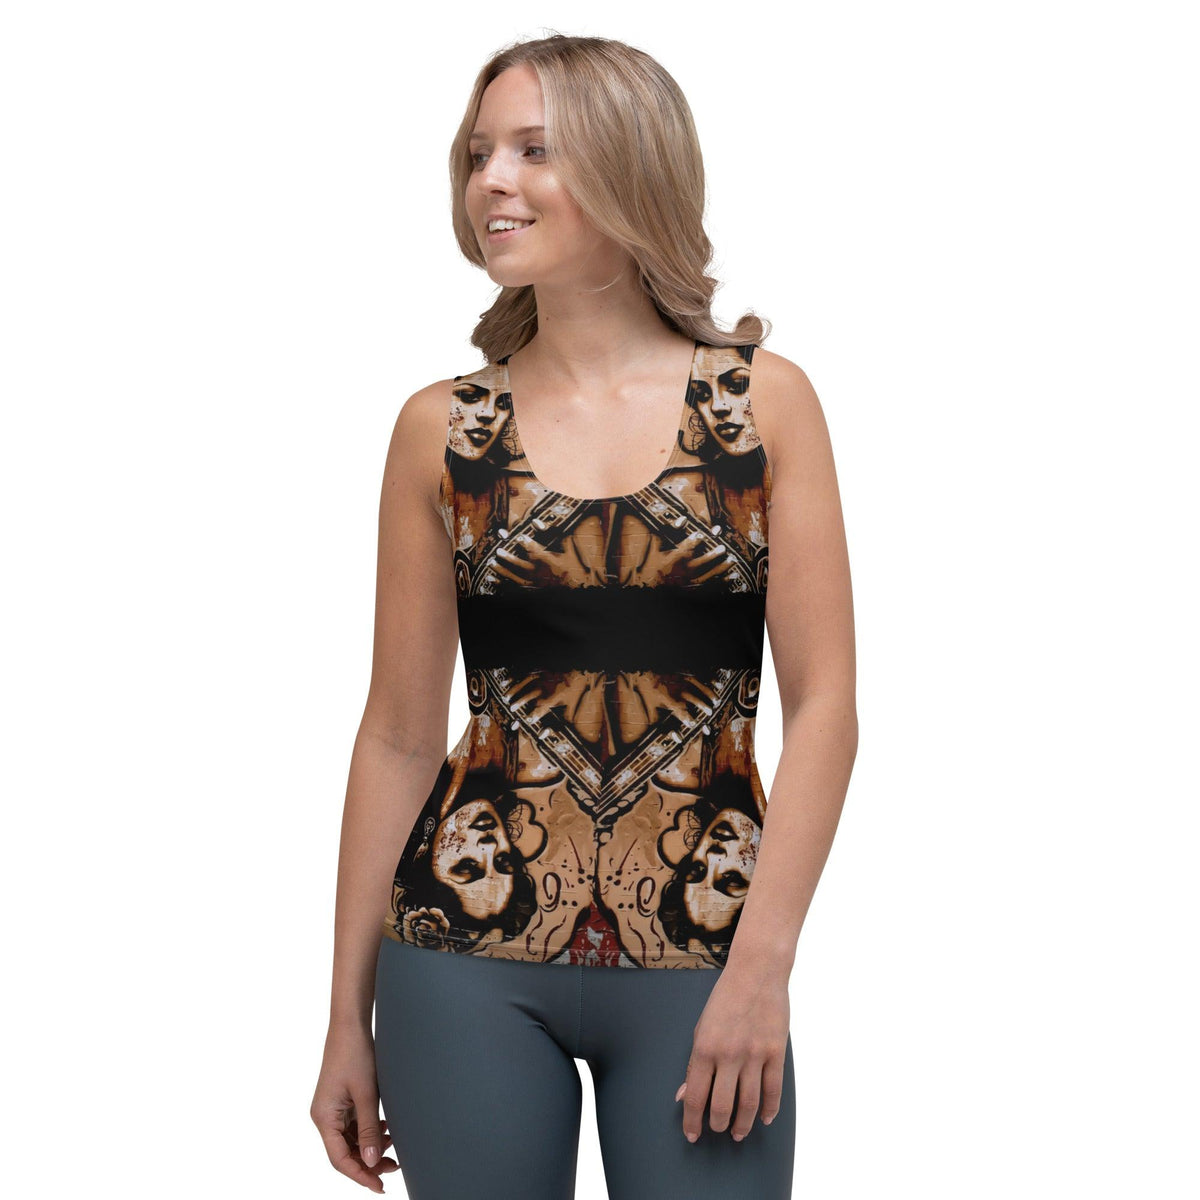 Flowing Passion, Roaring Guitar Sublimation Cut & Sew Tank Top - Beyond T-shirts